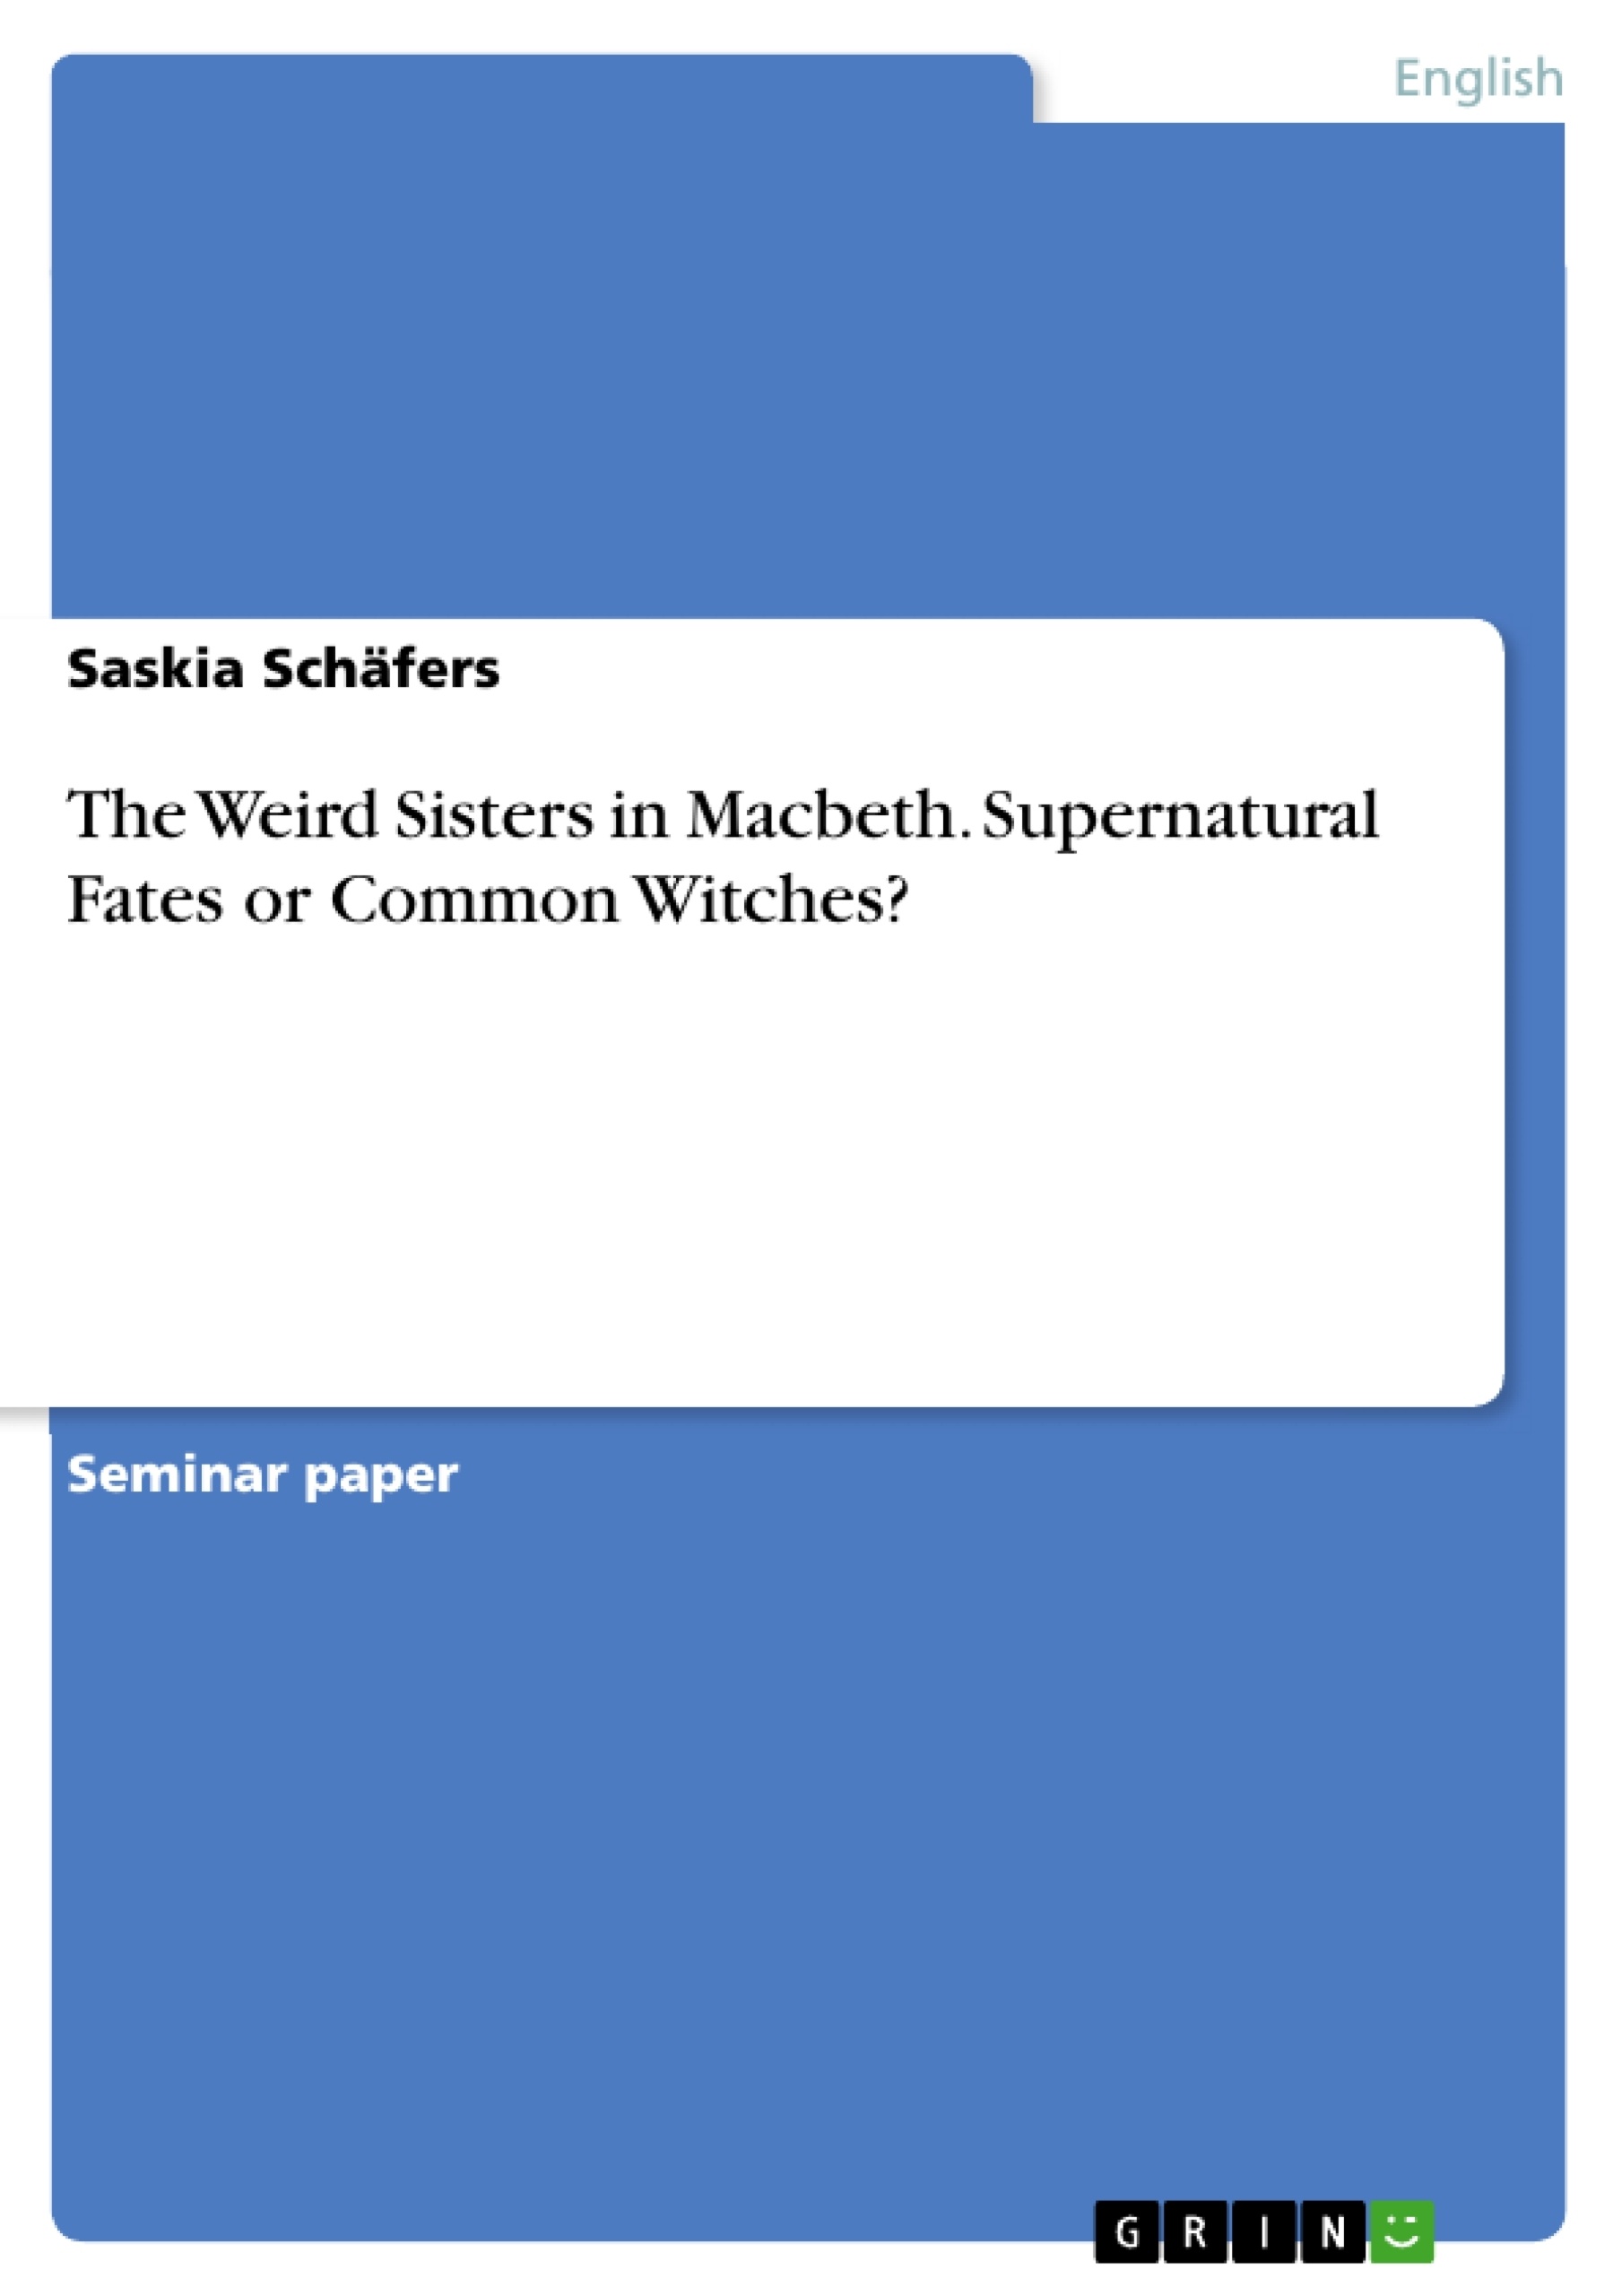 Titre: The Weird Sisters in Macbeth. Supernatural Fates or Common Witches?